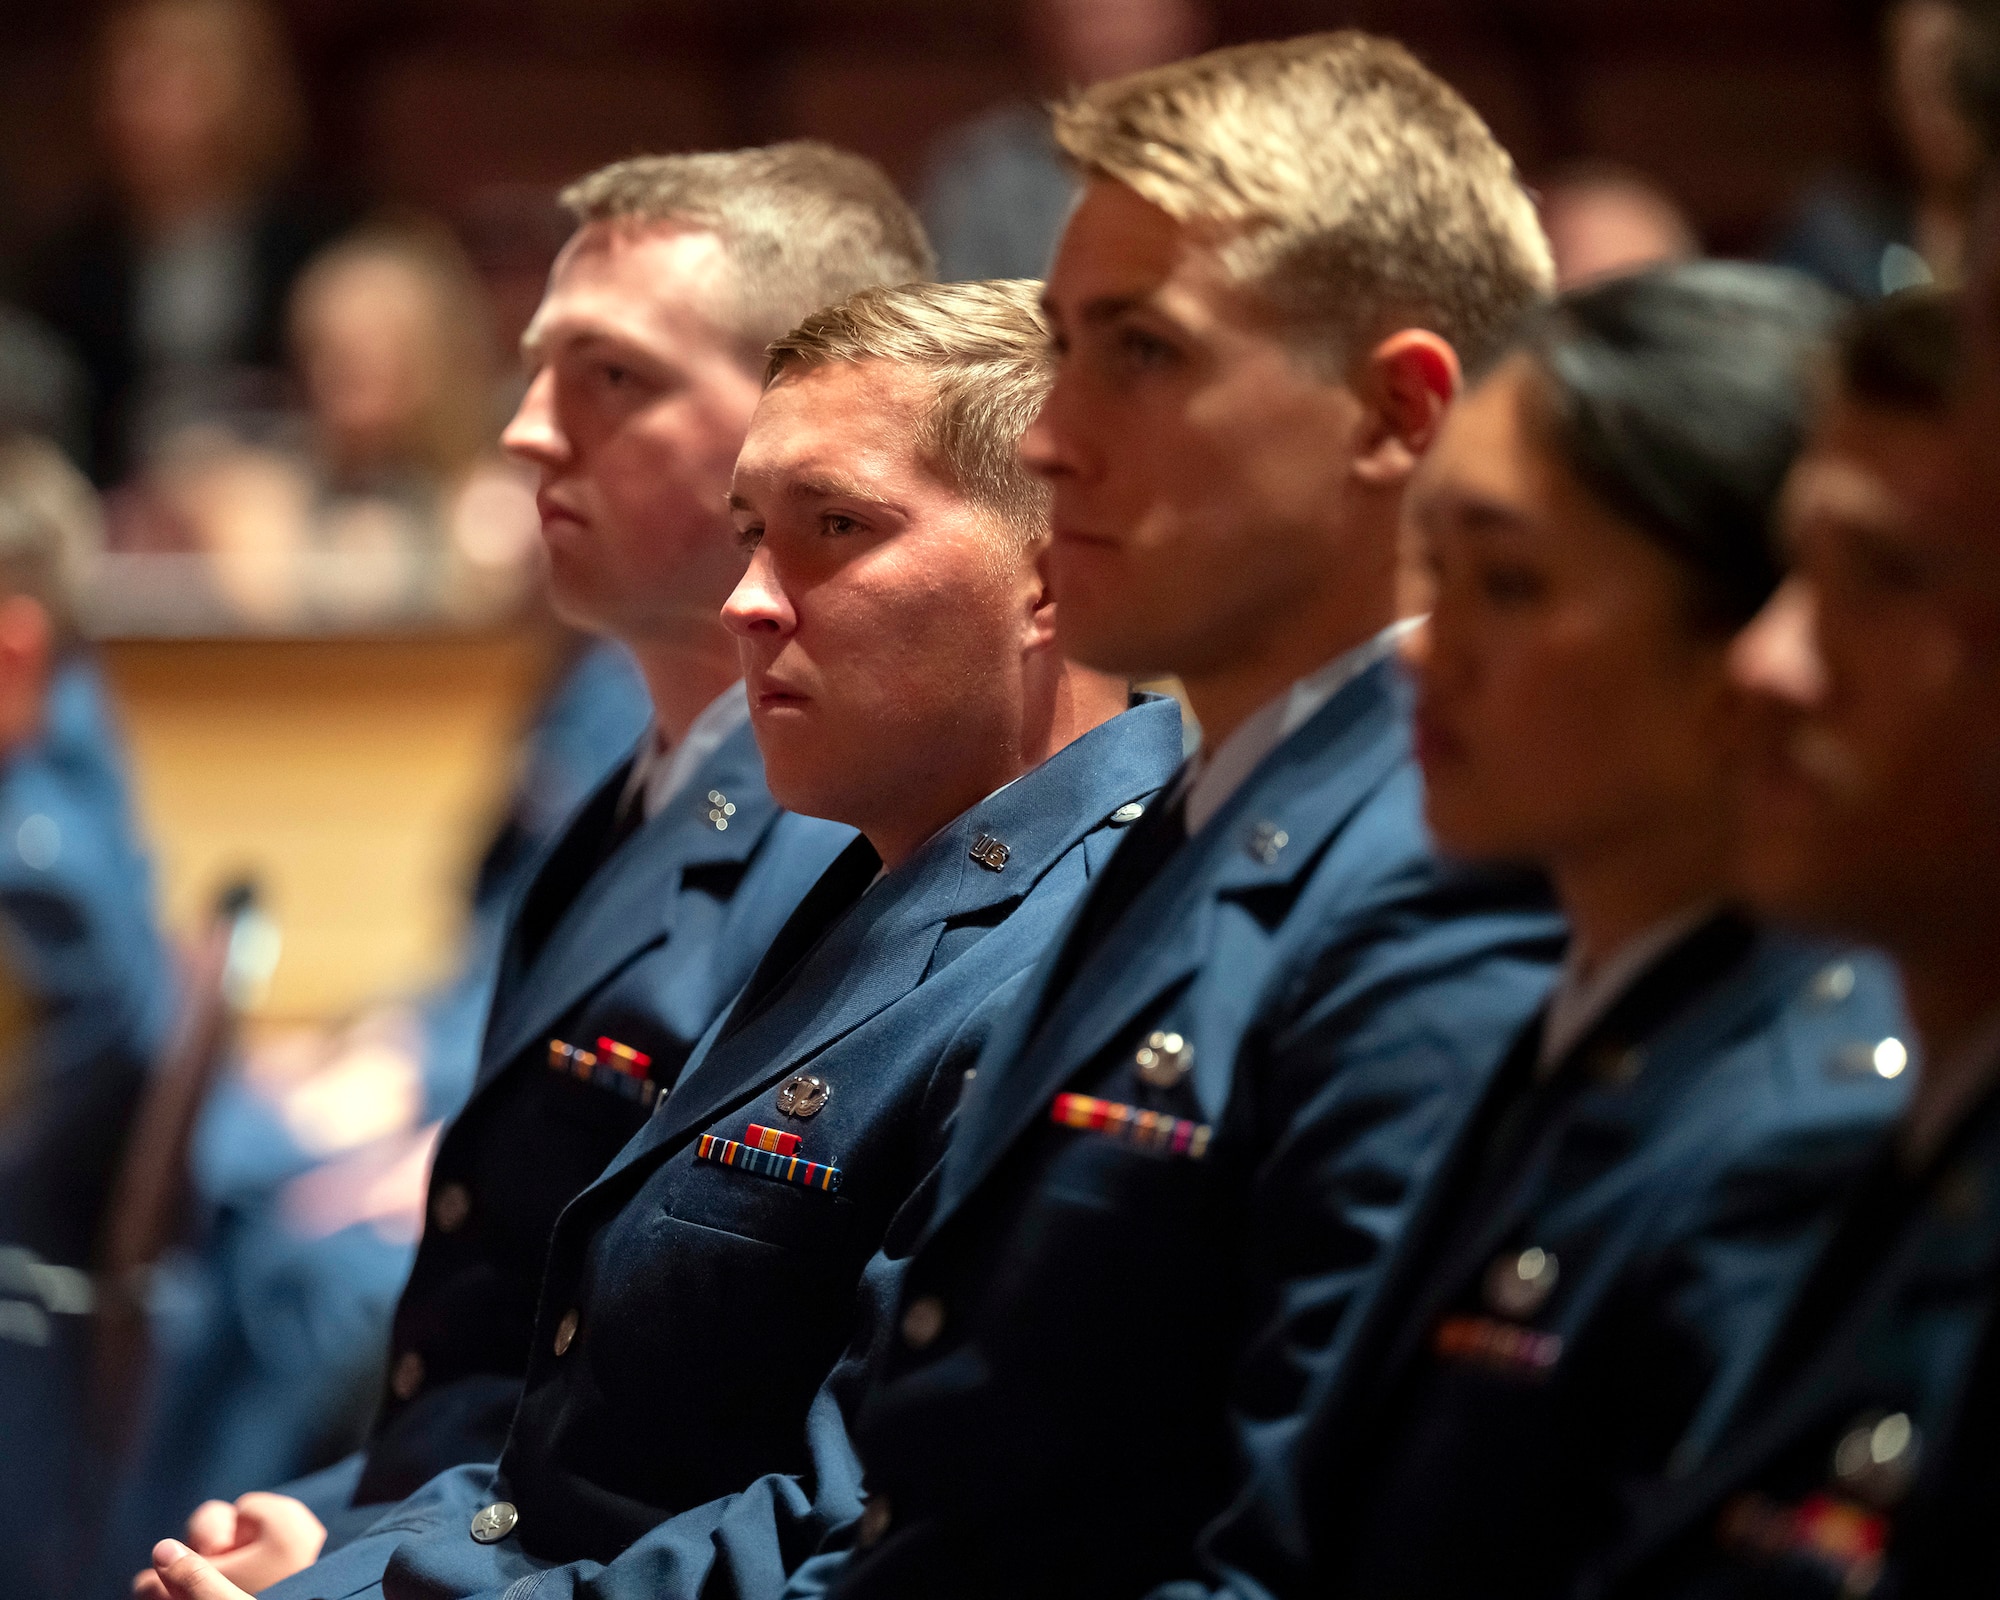 A row of people in Air Force dress uniform sit facing to the left.